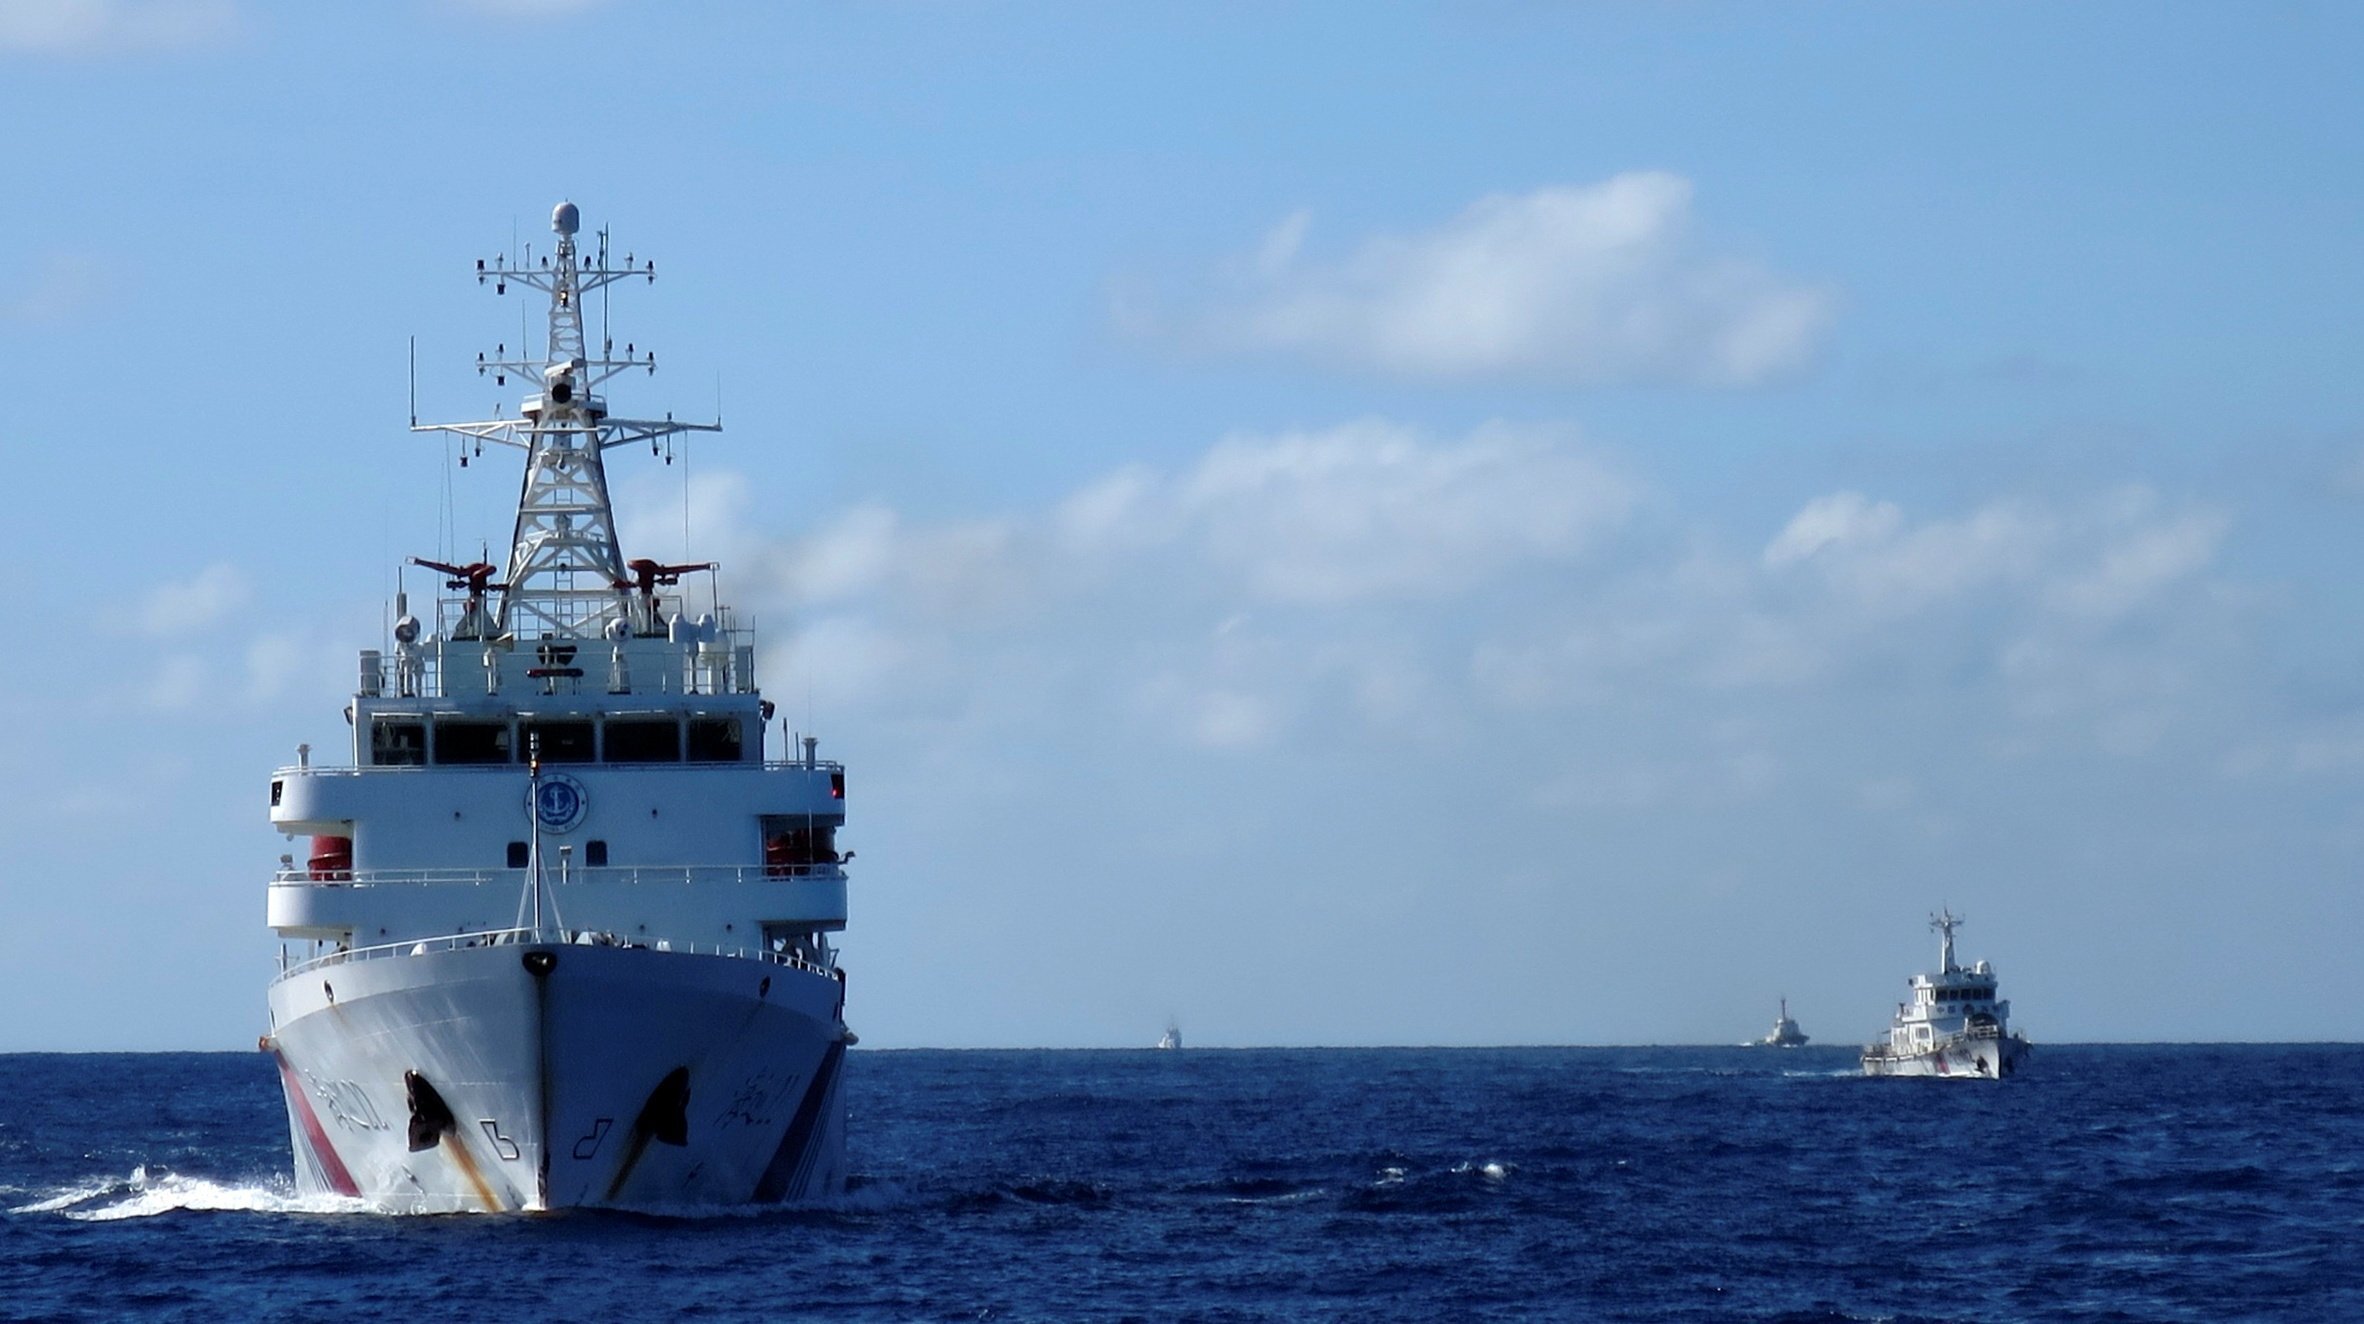 Chinese coastguard ships in the South China Sea in 2014. Photo: Reuters